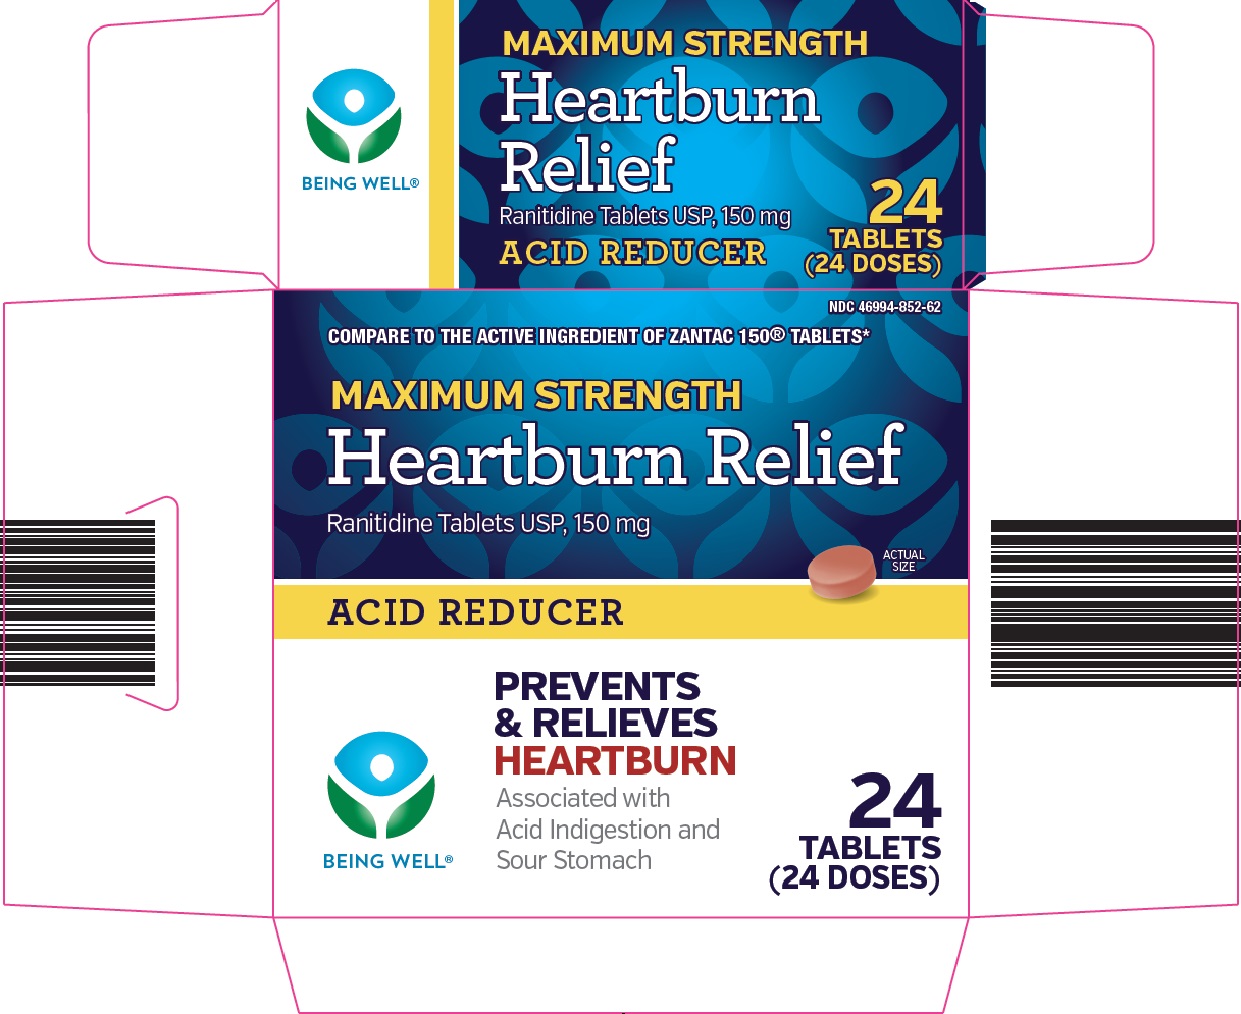 Being Well Heartburn Relief image 1